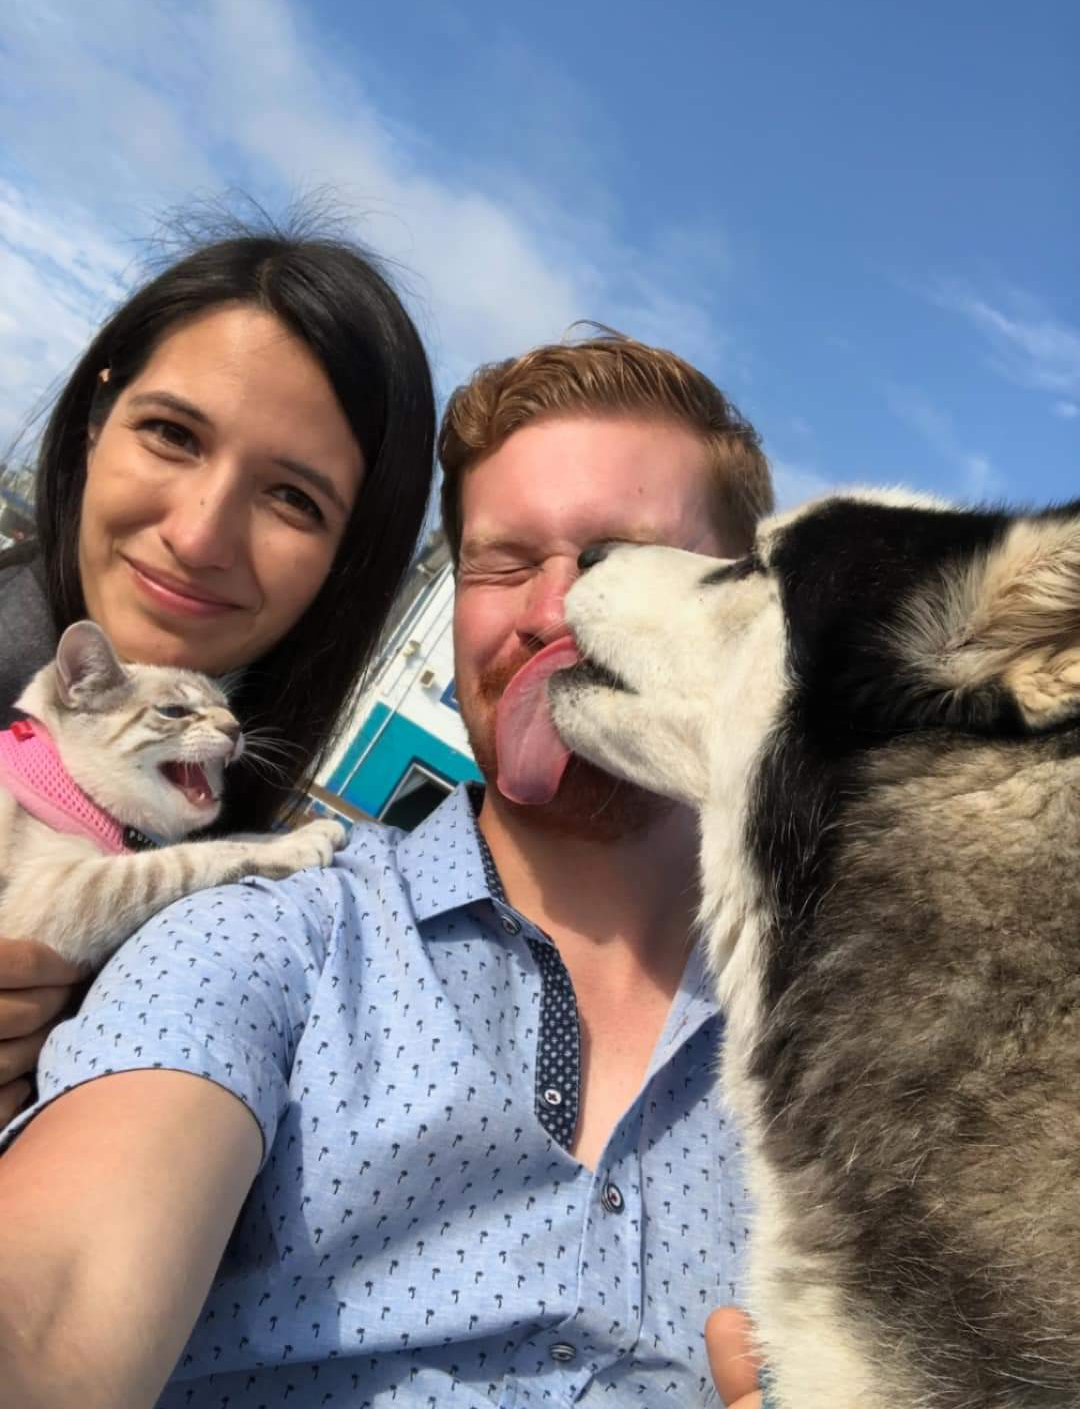 Just a typical family photo with our furbabies...